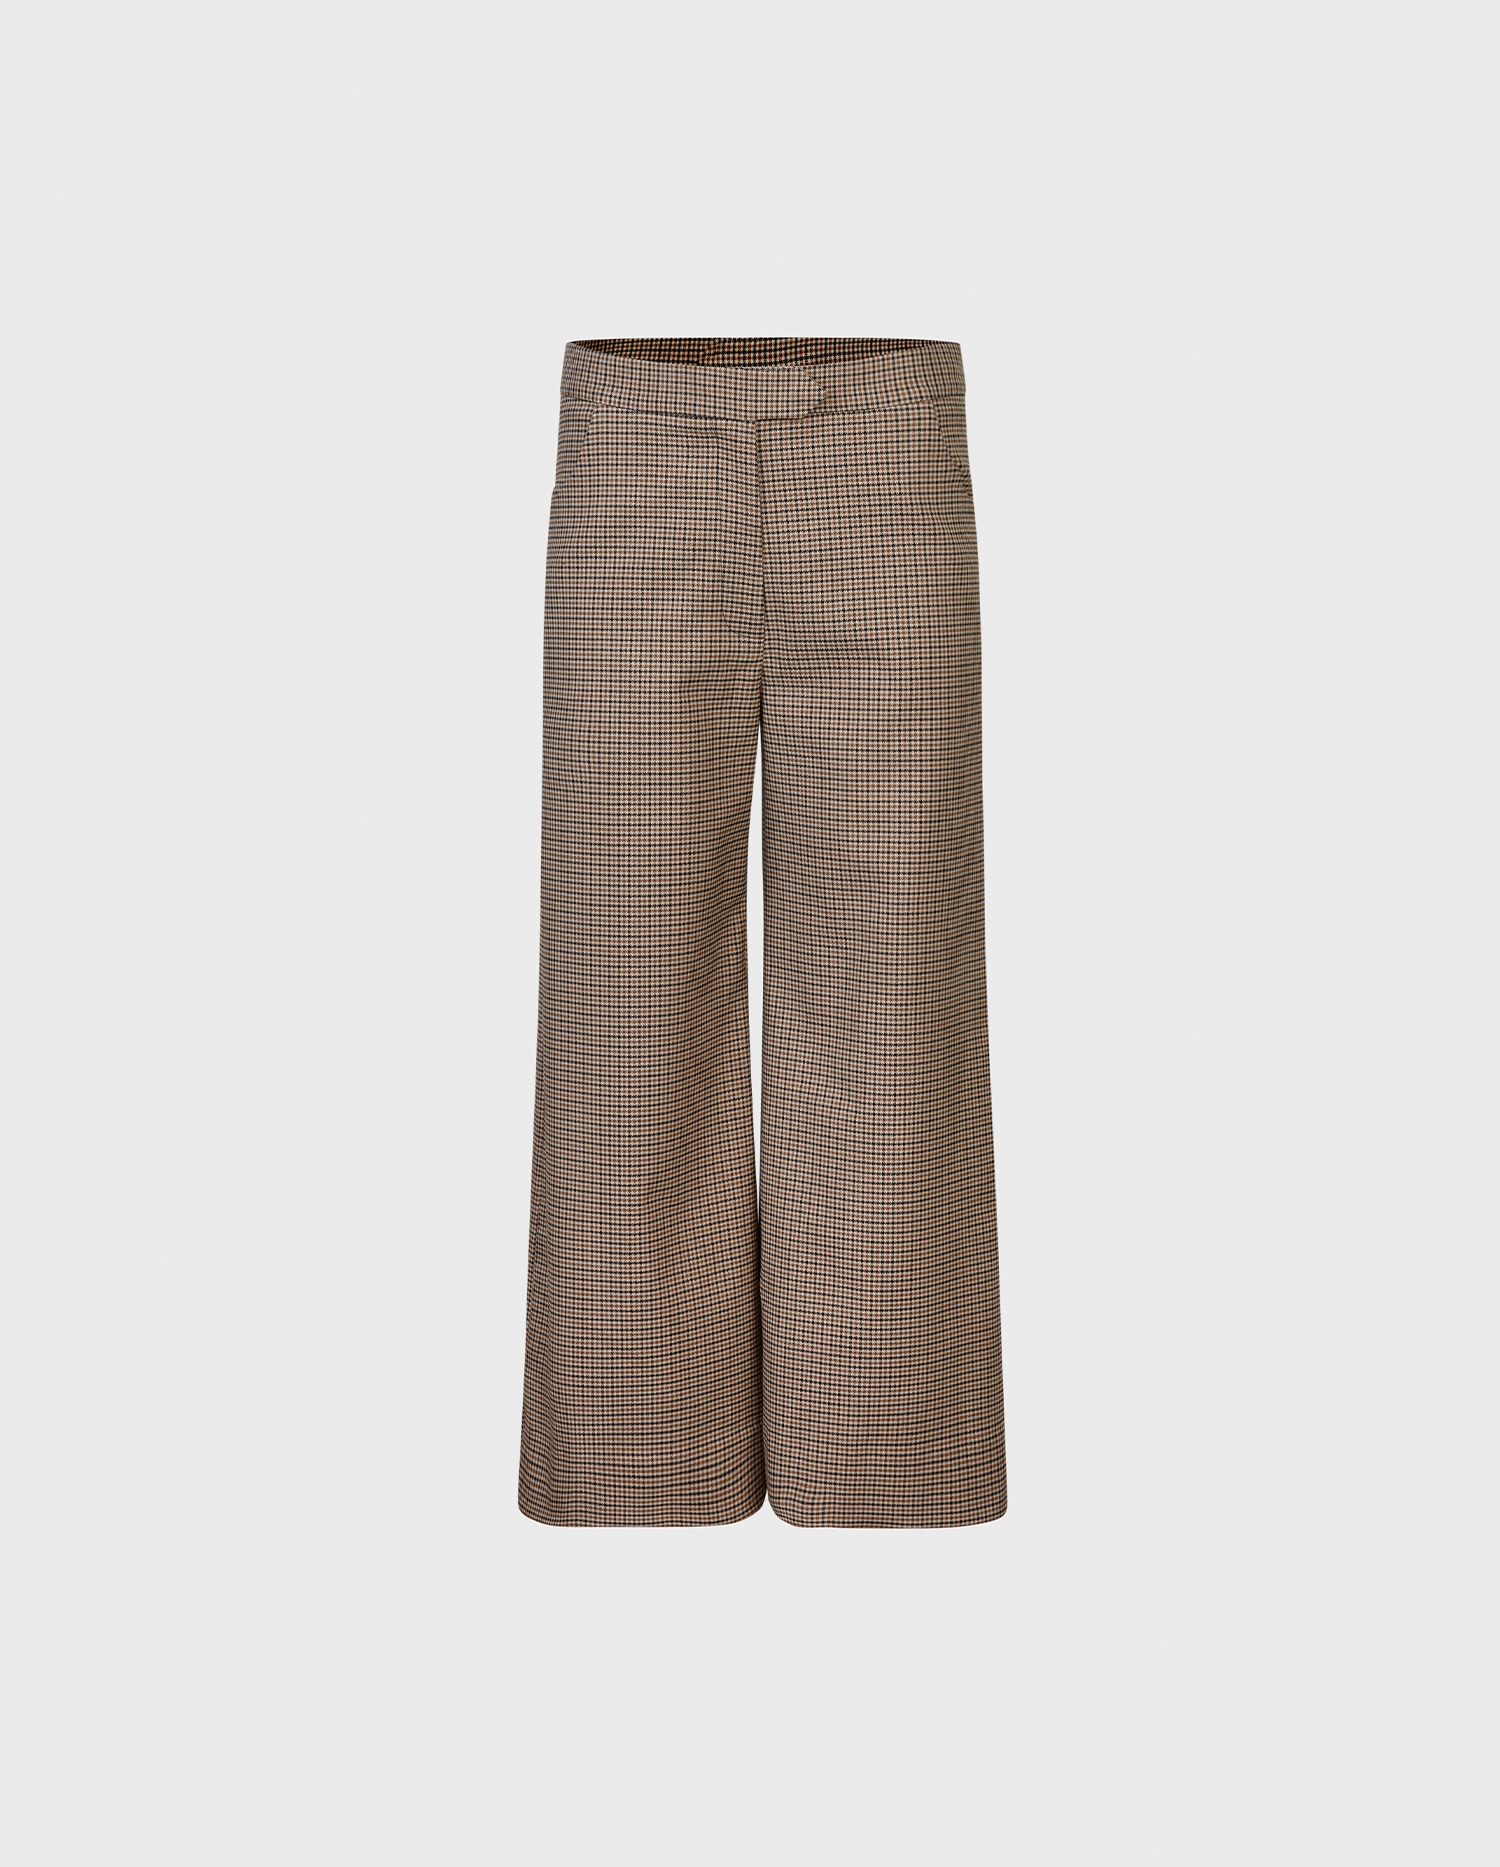 Discover the ECRIVAIN Brown Houndstooth Cropped Wide-Leg Pant